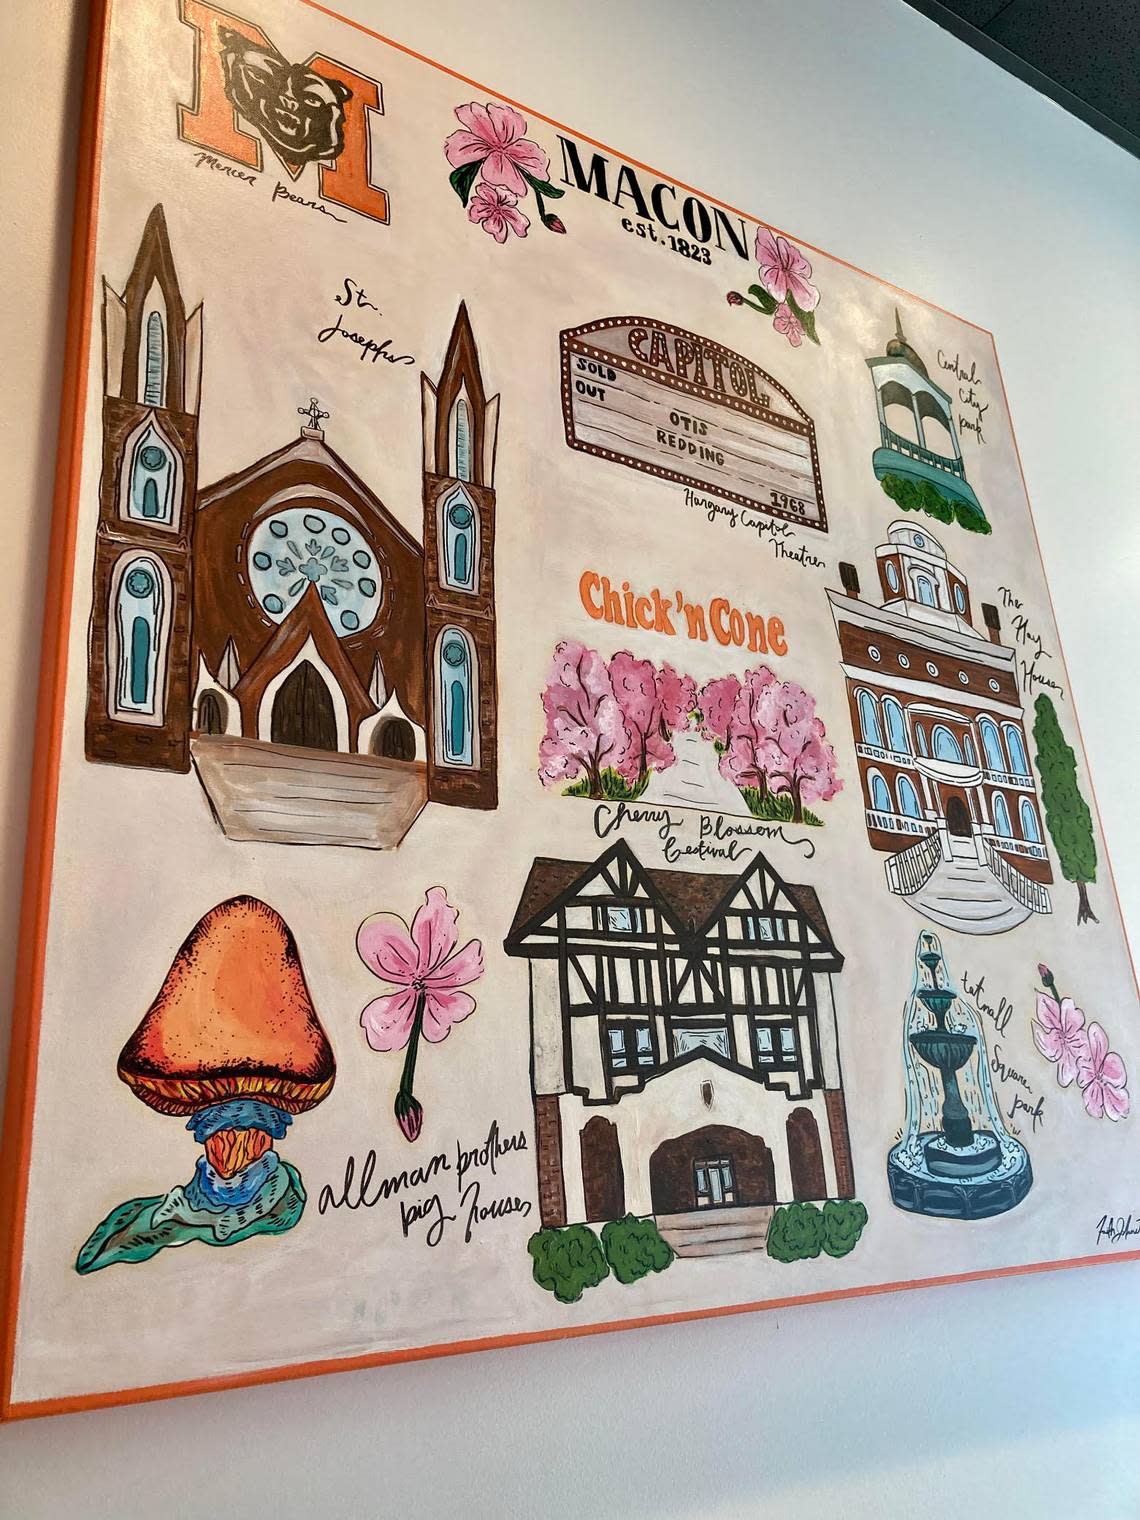 This tribute to Macon hangs in the new Chick’nCone at 860 Forsyth St., Suite 102, near Artium Health Navicent, and is a gift for franchise owners Wes and Fabi Kostovetsky from his sister Kathryn Kostovetsky, who commissioned local artist Faith Johnston to create it.